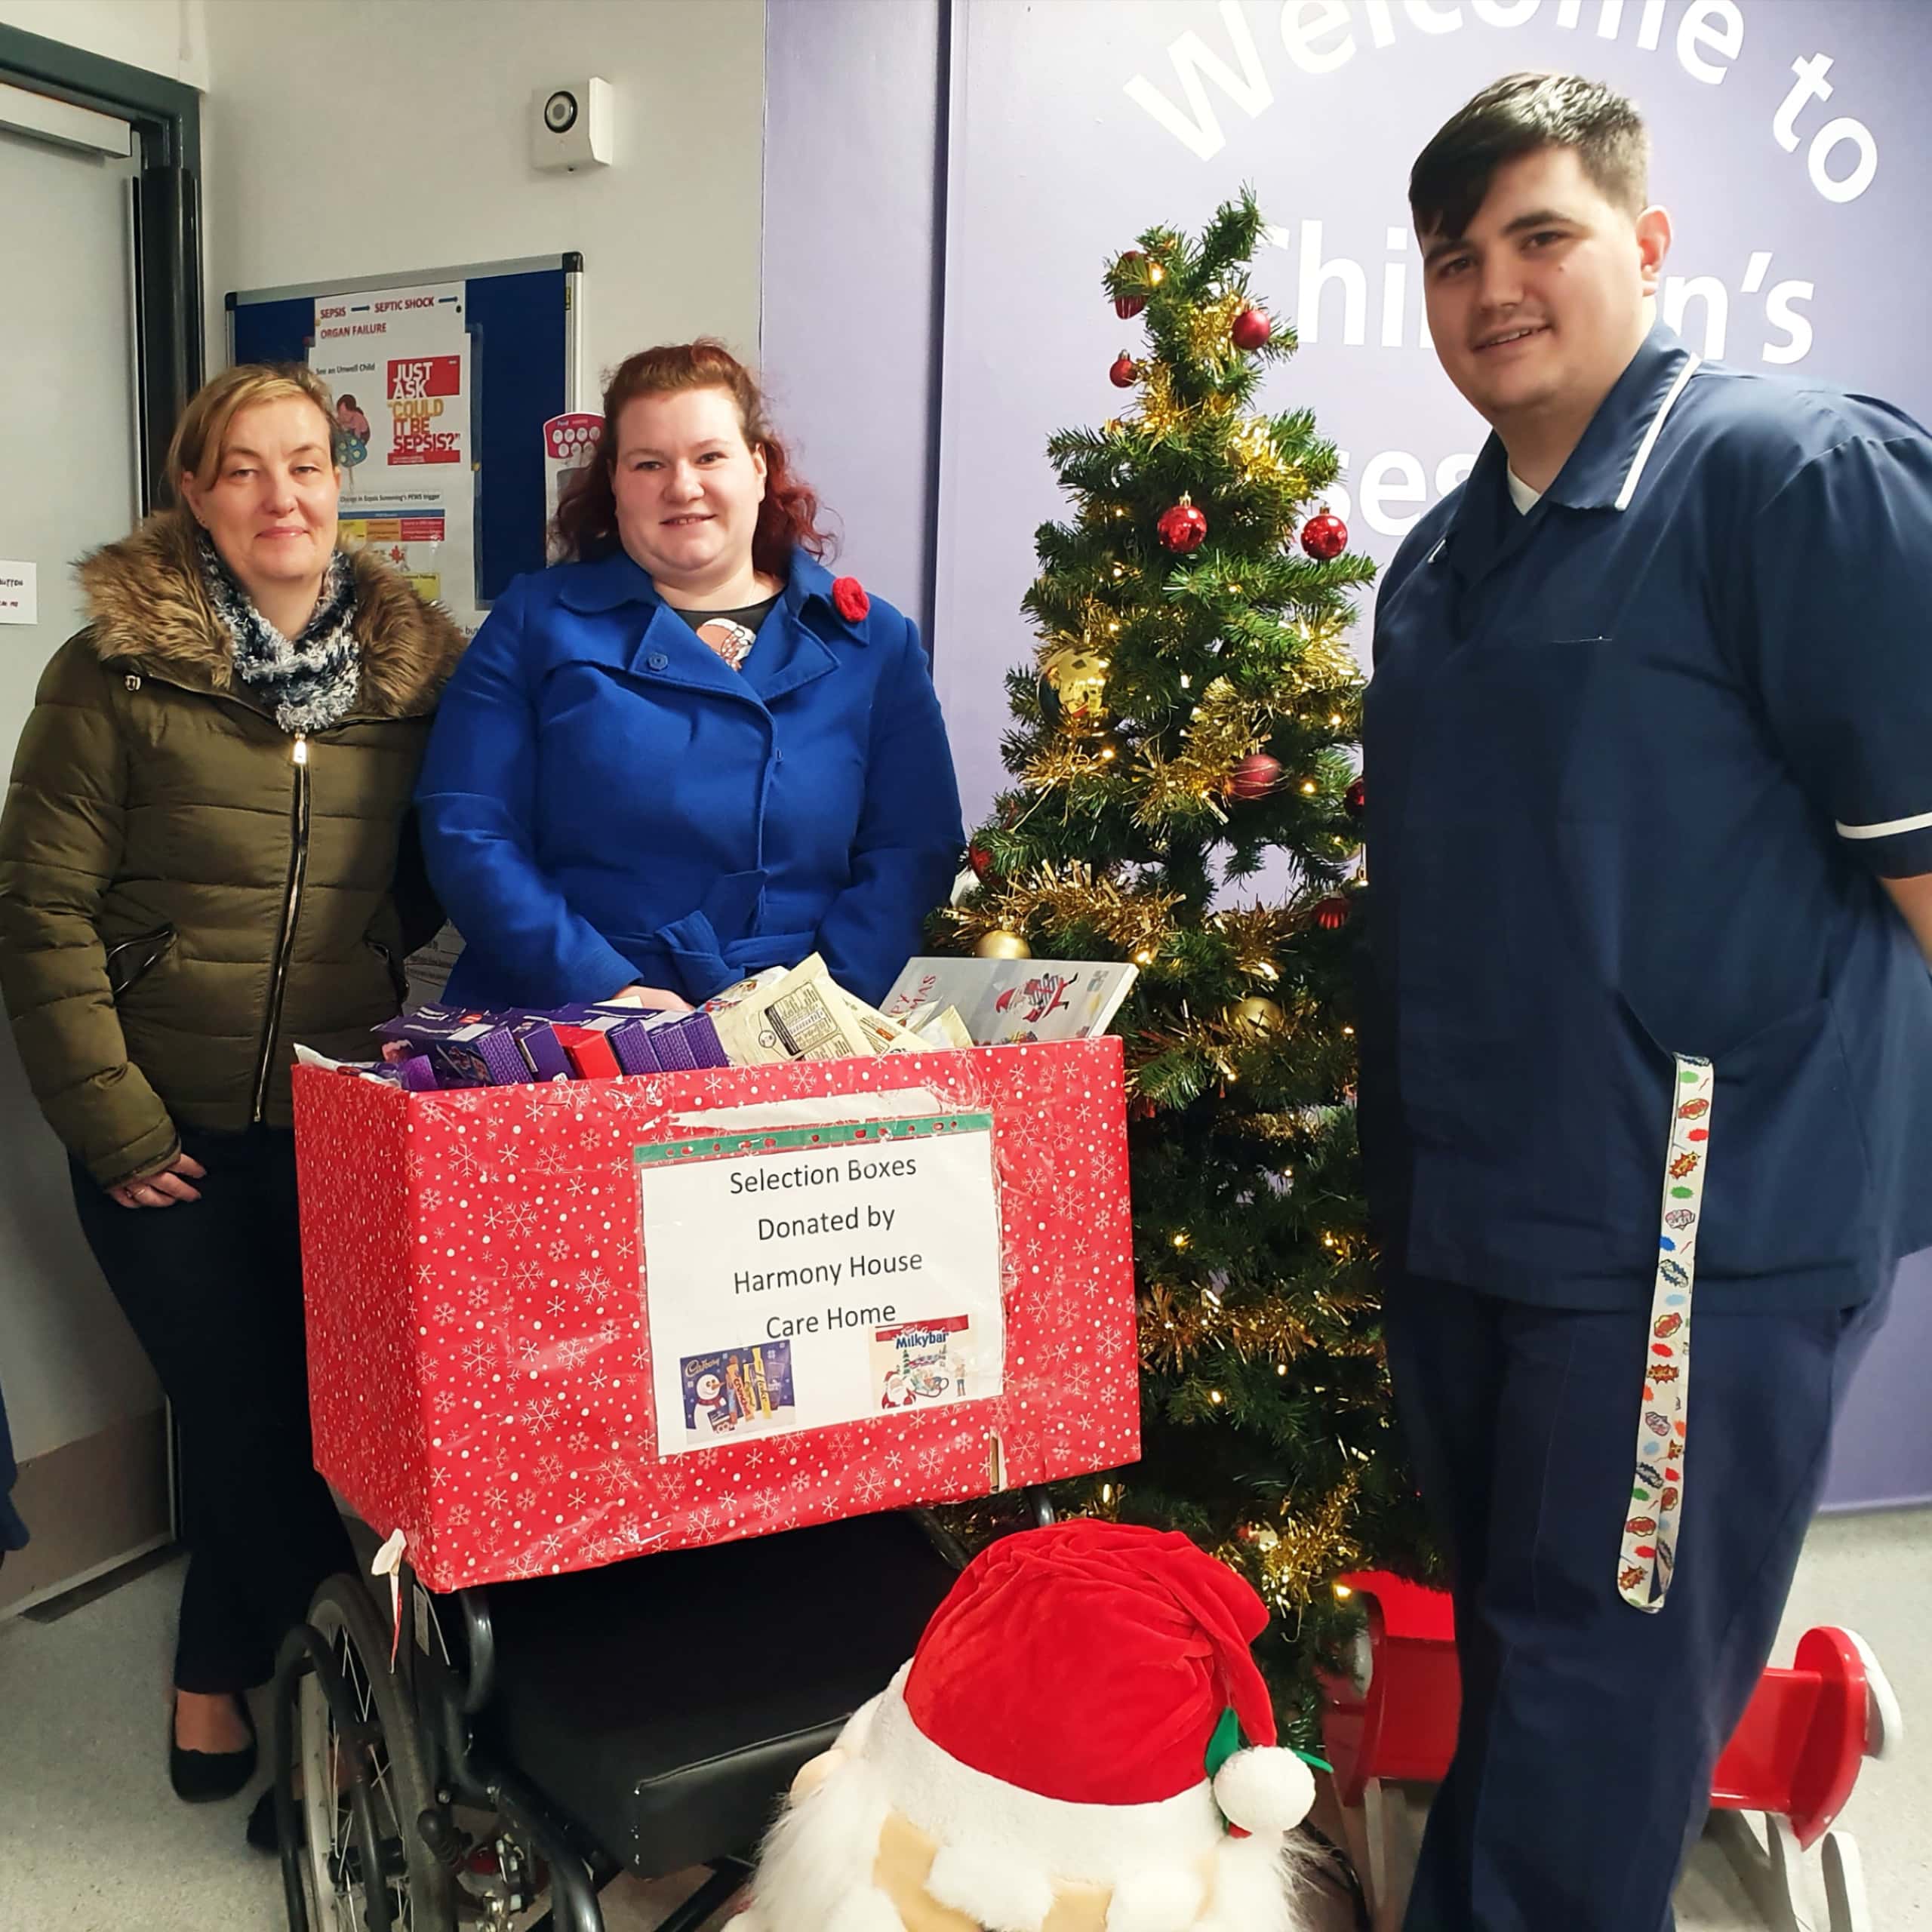 Harmony House Care Home Manager Karin Scott and Activities Coordinator Hayley Gibbs deliver a donation of 60 selection boxes to patients at Children's A&E at the George Elliot Hospital in Nuneaton.